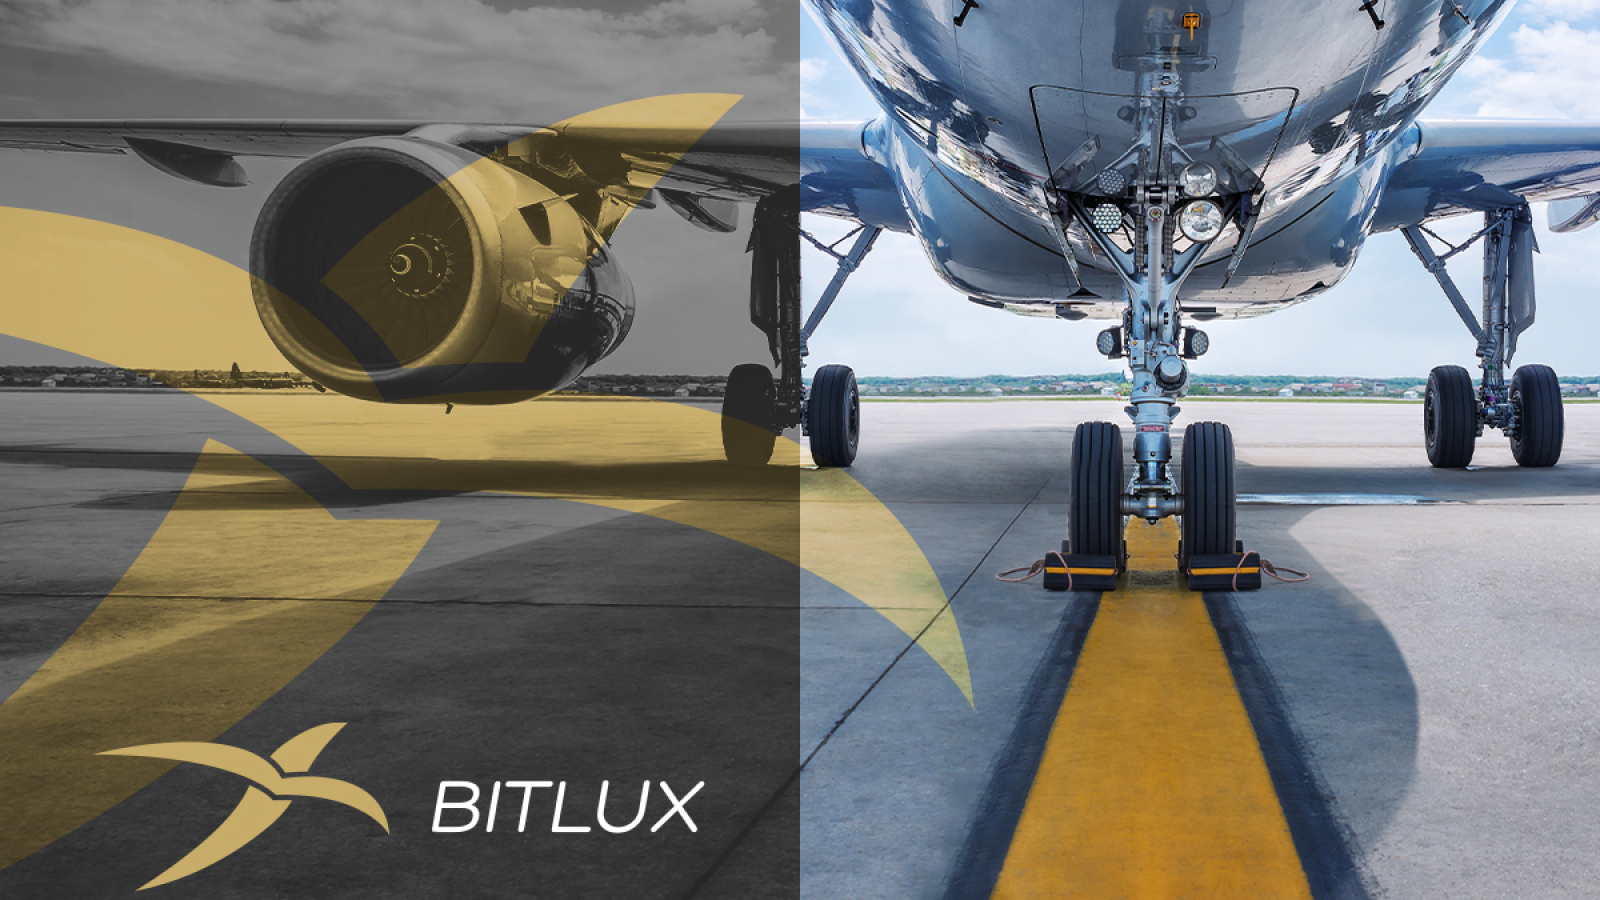 BitLux reports more than 50% of charter flights booked using cryptocurrencies during 2021